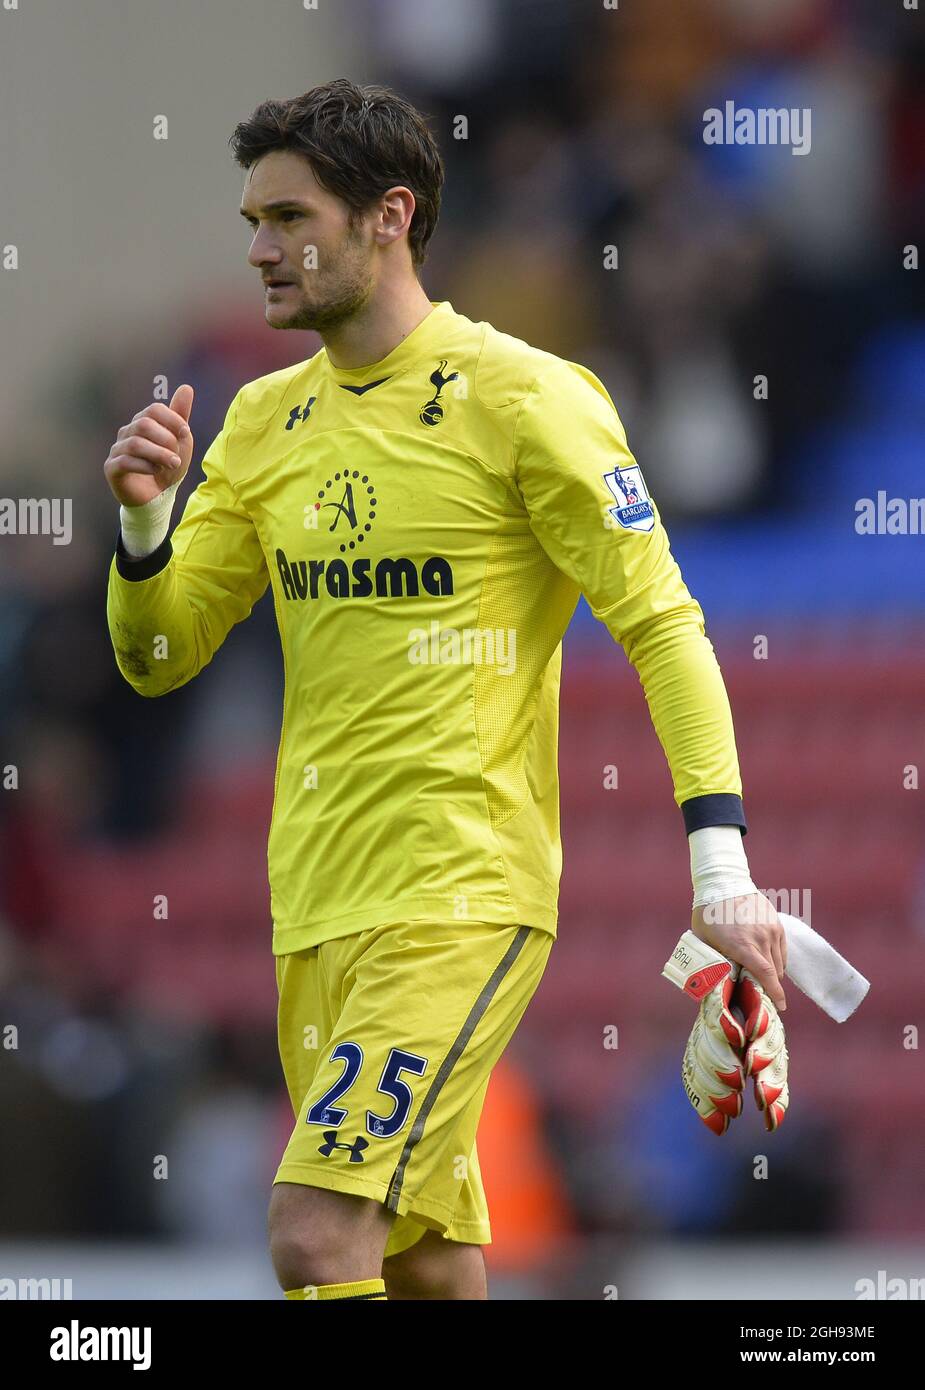 Hugo Lloris of Tottenham during the Barclays Premier League match between Wigan Athletic and Tottenham Hotspur at the DW Stadium in Wigan, UK on April 27, 2013. Stock Photo